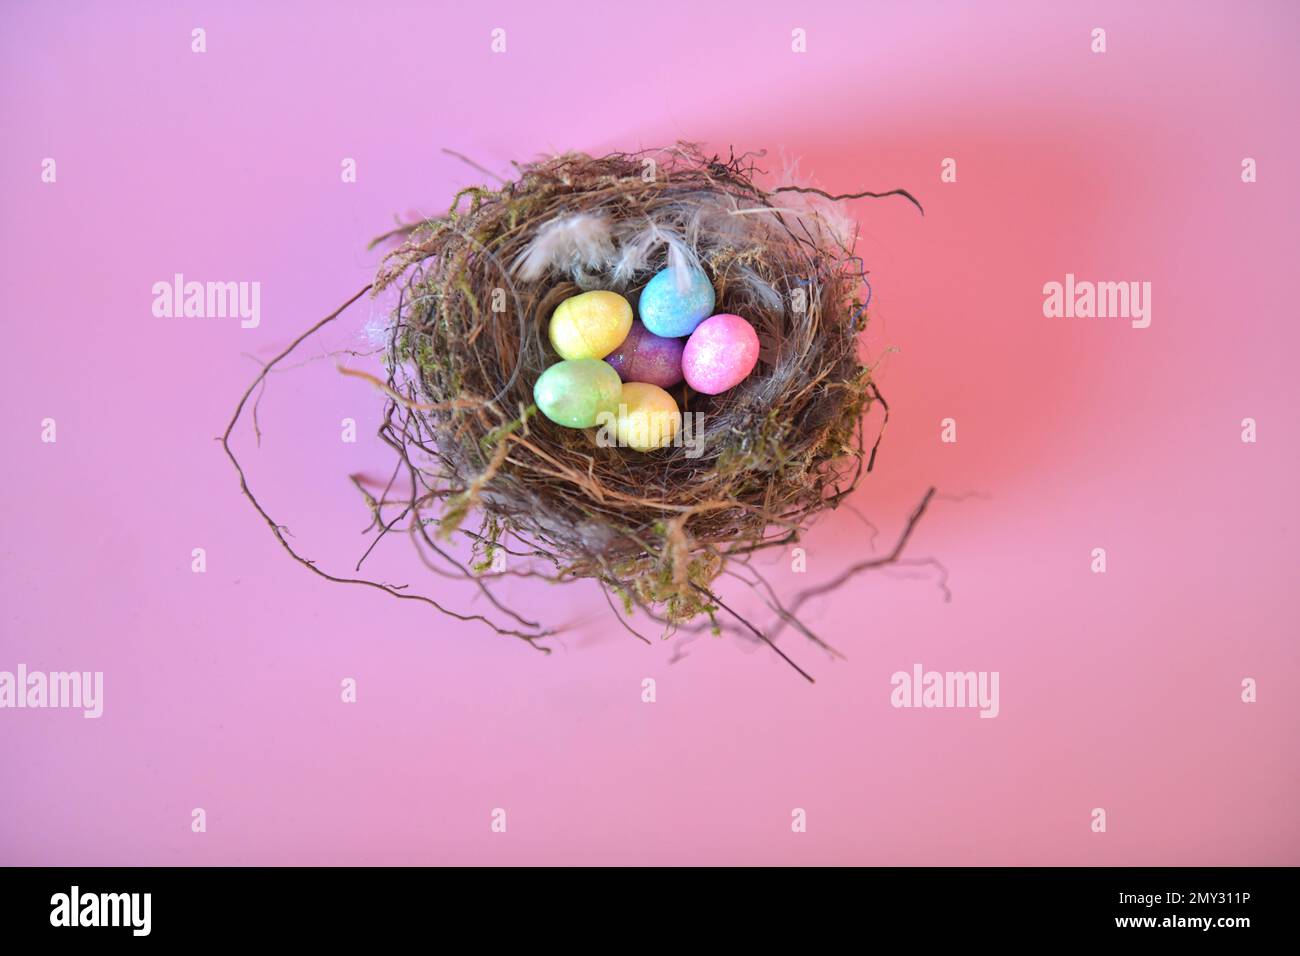 Artificial Easter eggs in real bird's nest. Horizontal photo with nest centered in the middle. Stock Photo